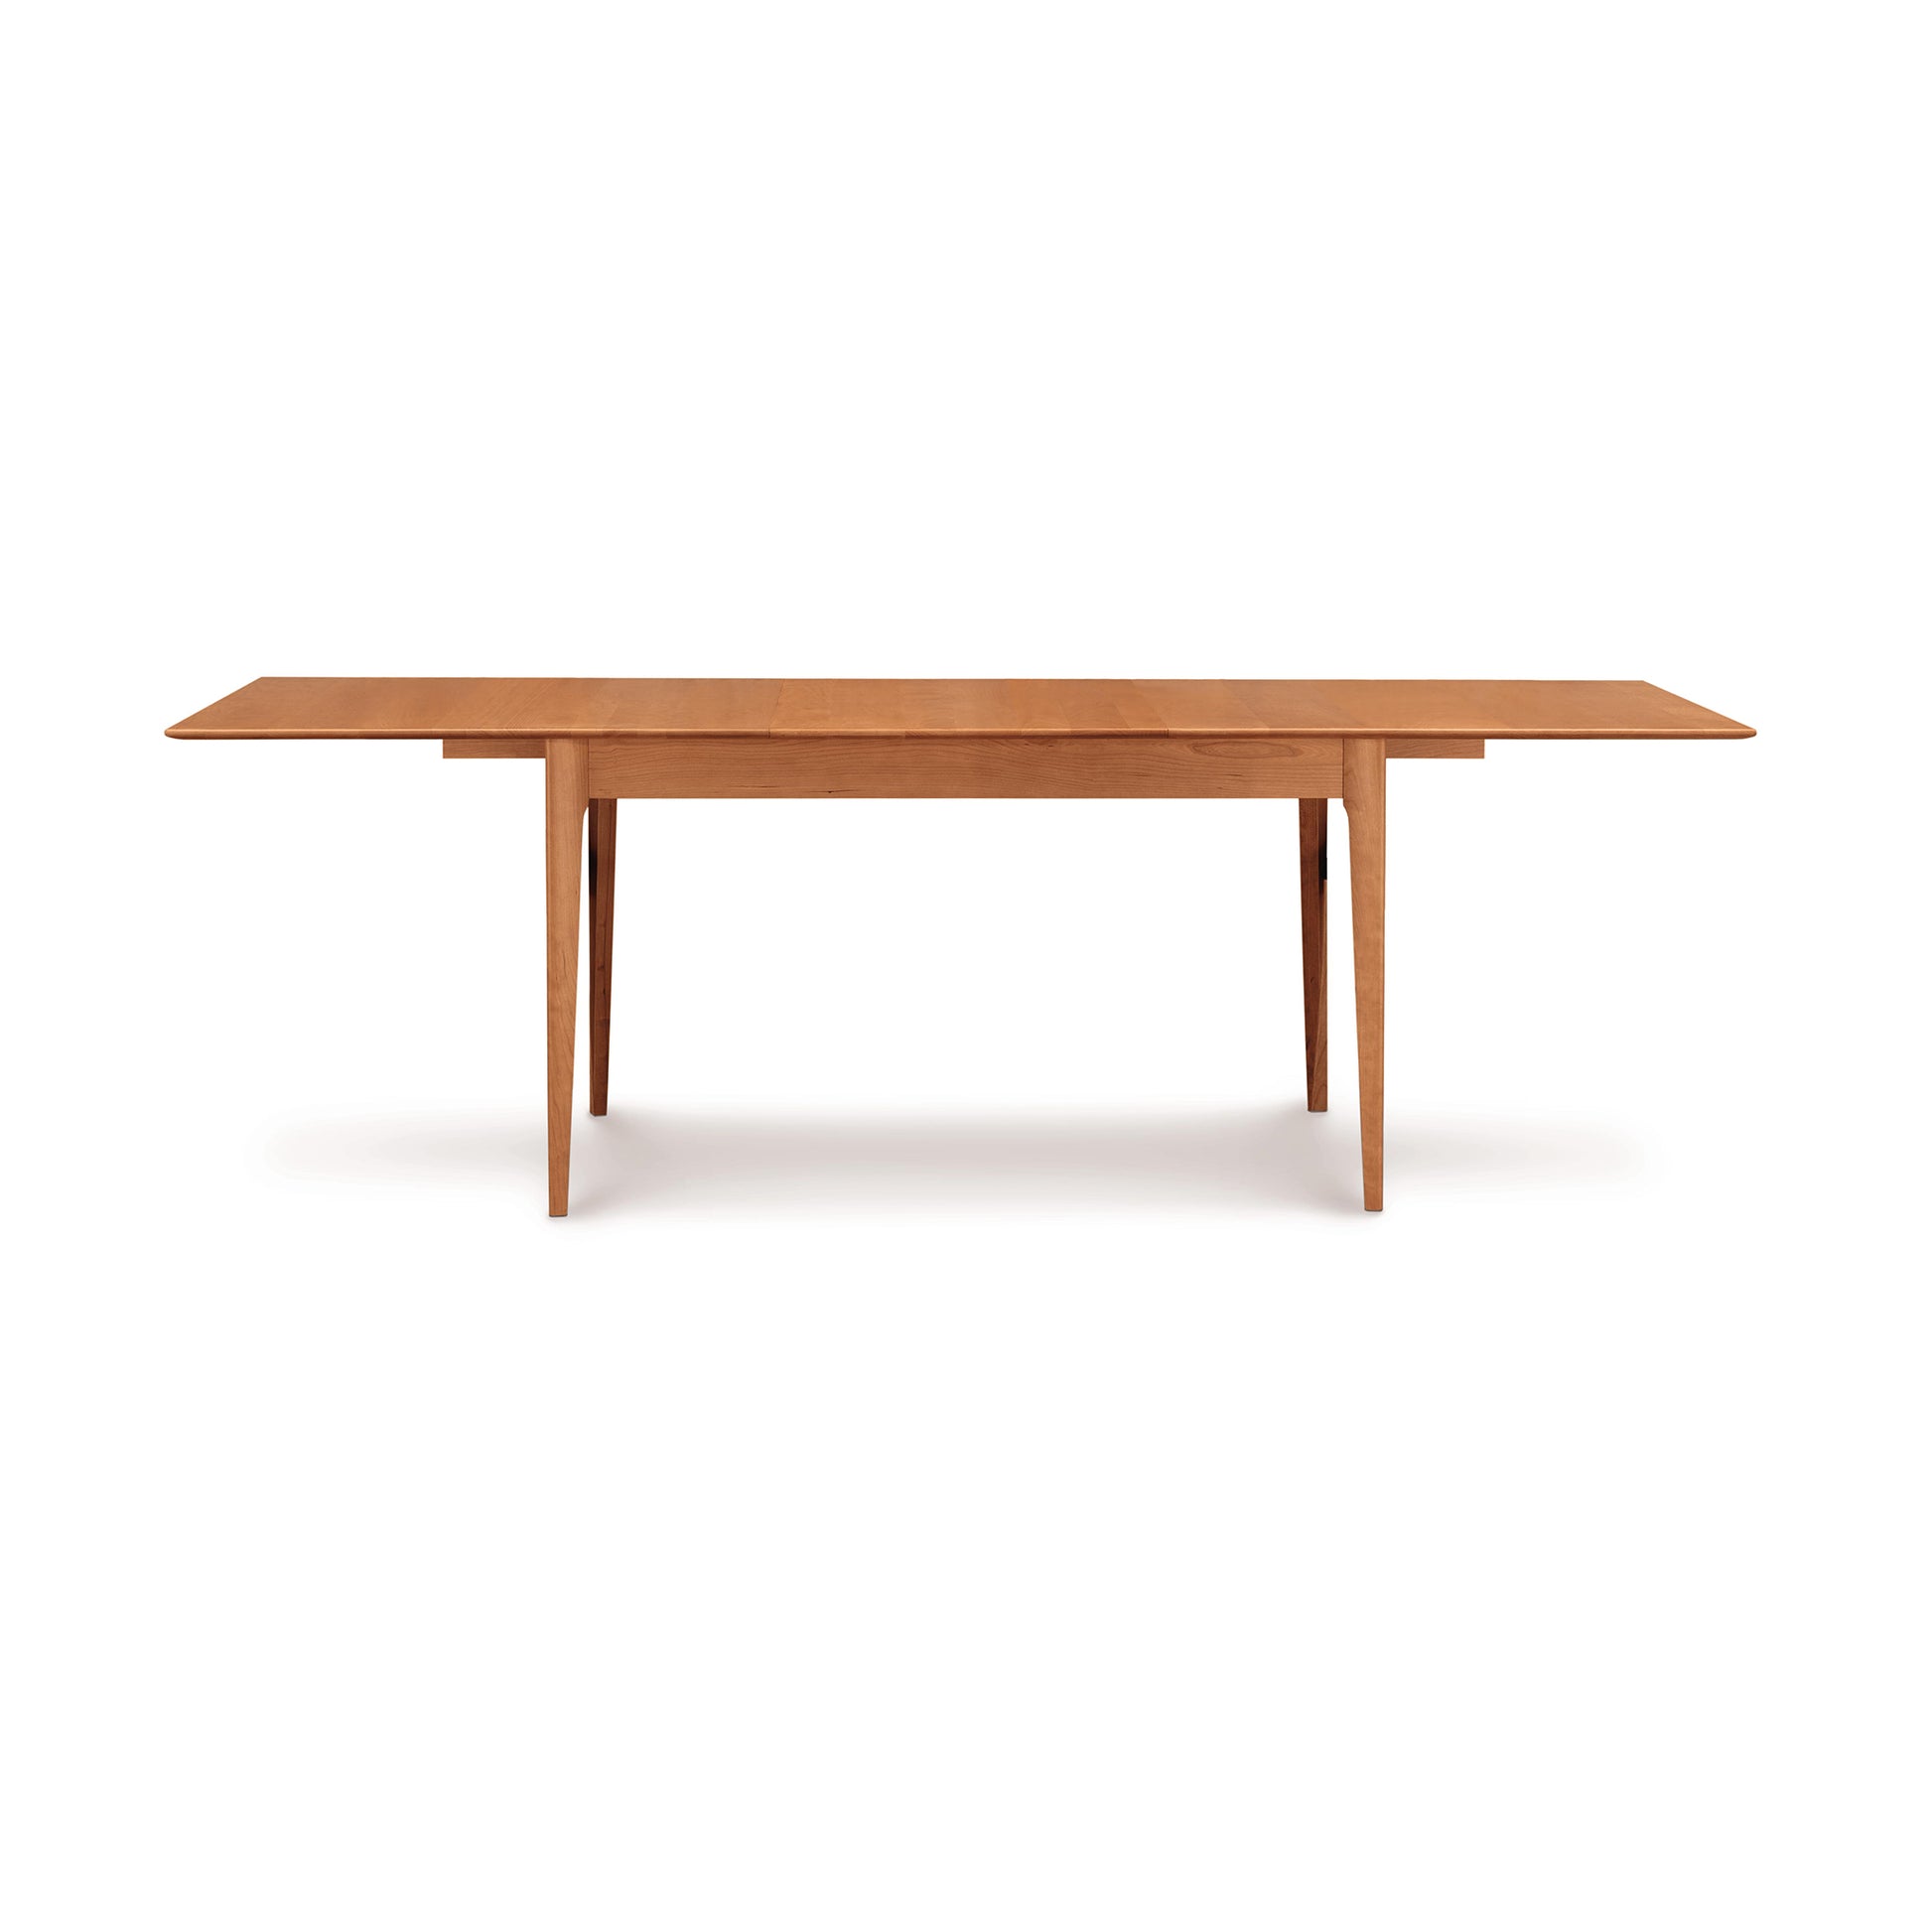 A Sarah Shaker Tapered Leg Extension Table with its leaves unfolded, isolated against a white background by Copeland Furniture.